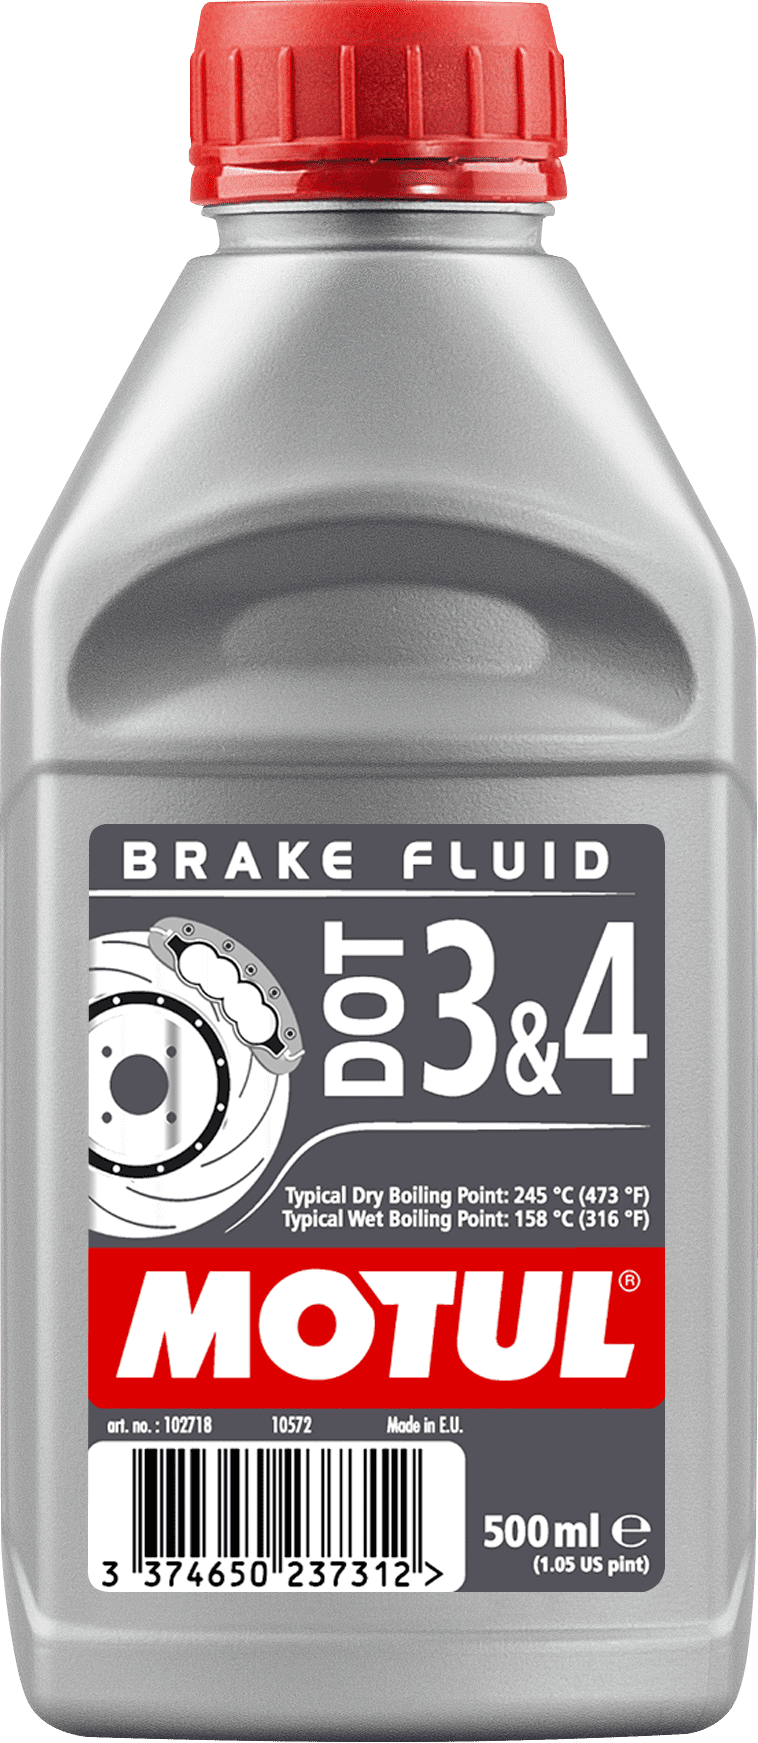 102718-500ML 100% synthetic brake fluid on polyglycol basis for all types of hydraulic actuated brake and clutch systems meeting DOT 4 and DOT 3 manufacturers’ recommendations.